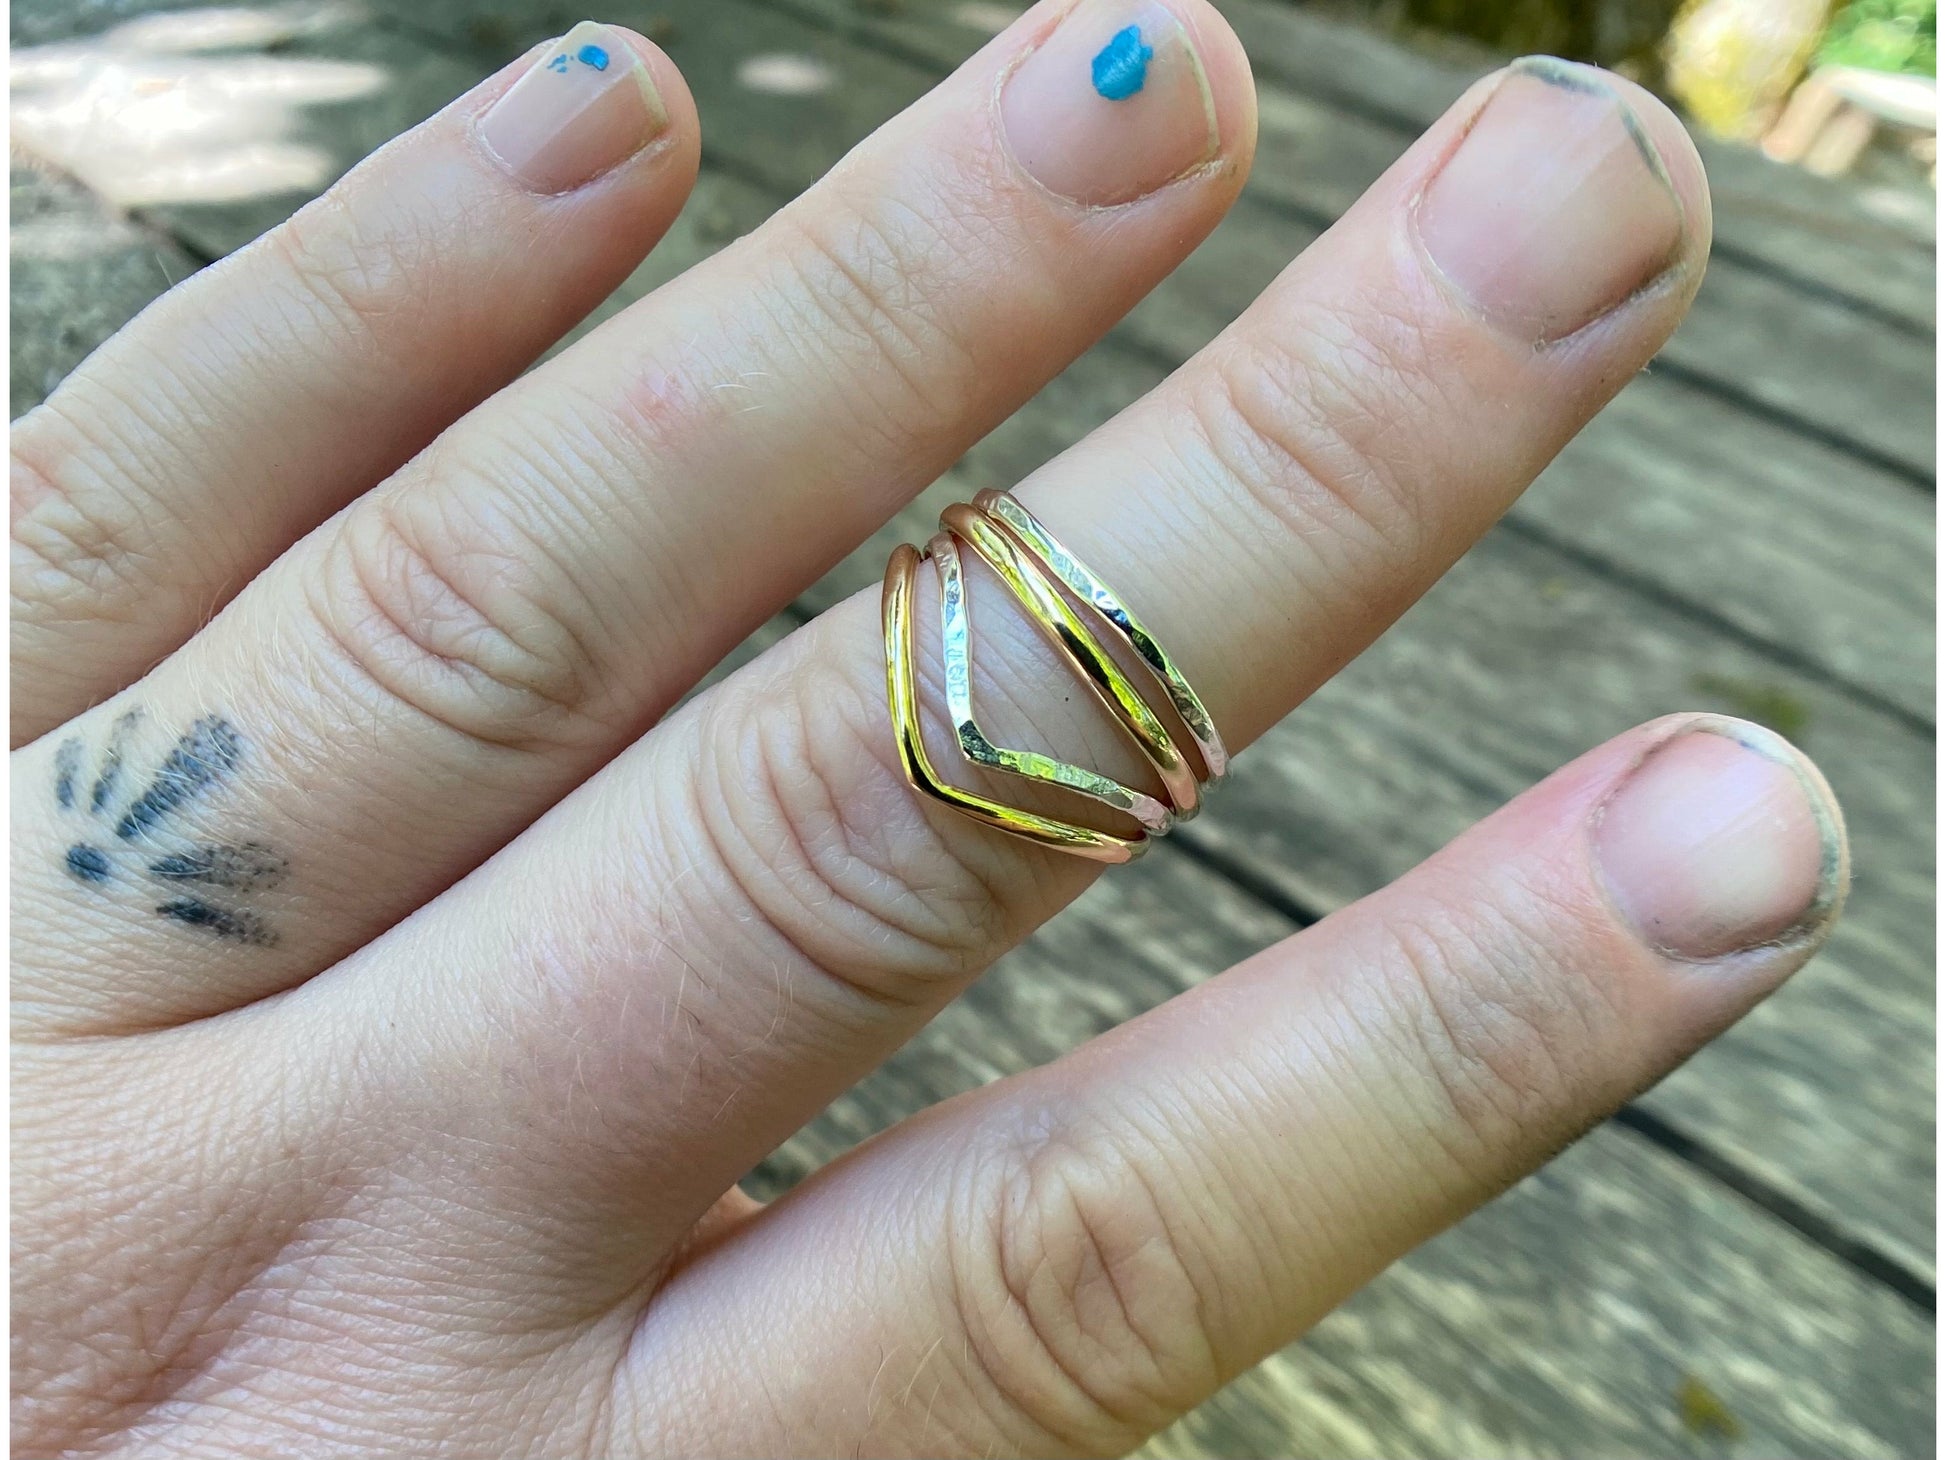 Silver and gold simple rings stacked upon a chevron shaped ring. Perfecting stacking set for a simple forward look.